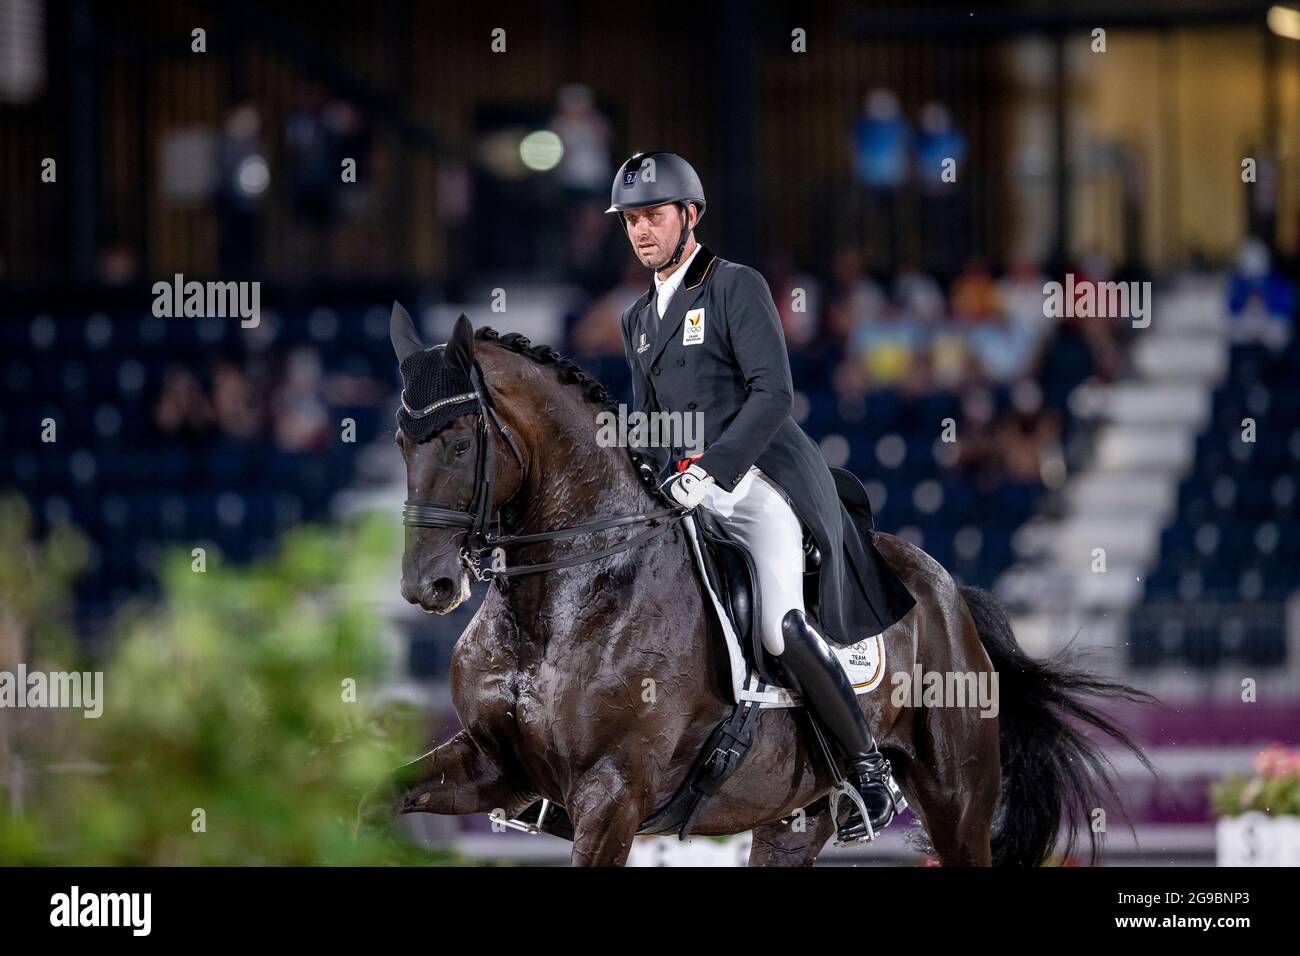 Belgian Equestrian dressage rider Domien Michiels and his horse Intermezzo van het Meerdaalhof pictured at day two of the equestrian dressage event, a Stock Photo